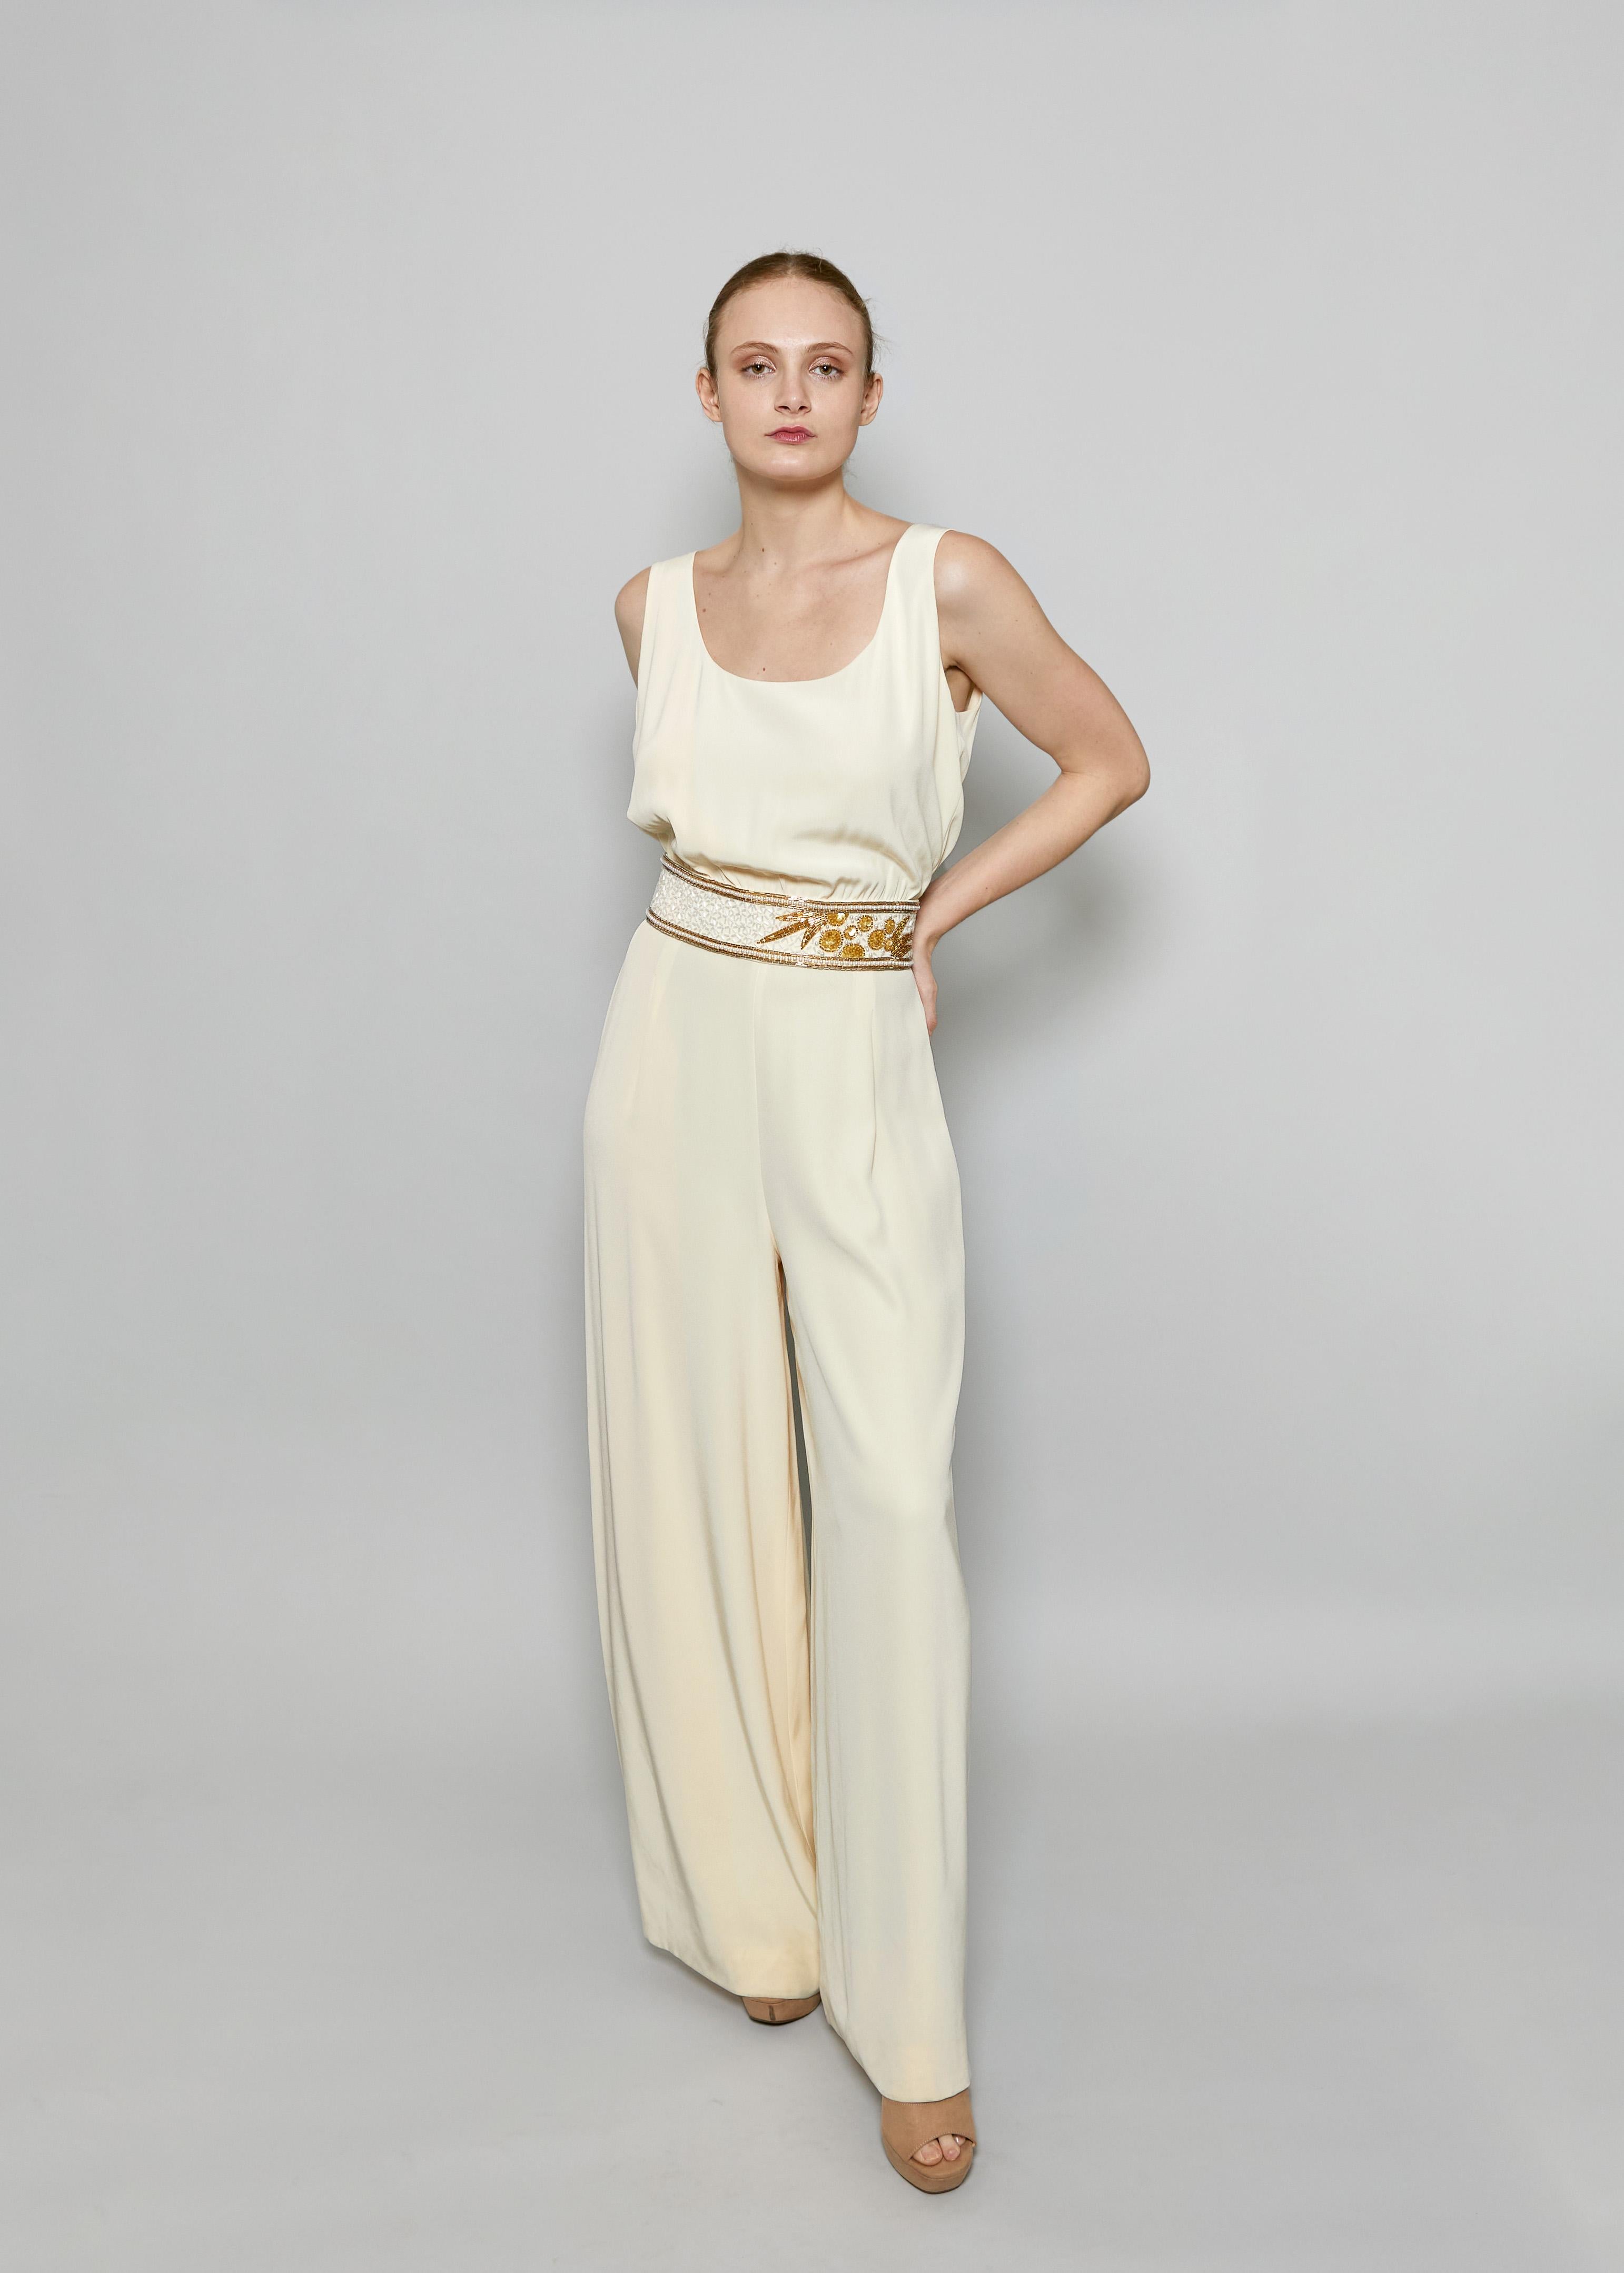 Indulge in luxury with the Bob Mackie Cream Jumpsuit. The creamy hue exudes elegance, while the beaded waist adds a touch of glamour. Make a statement at any event with this sophisticated and exclusive piece.



Condition: Excellent Vintage